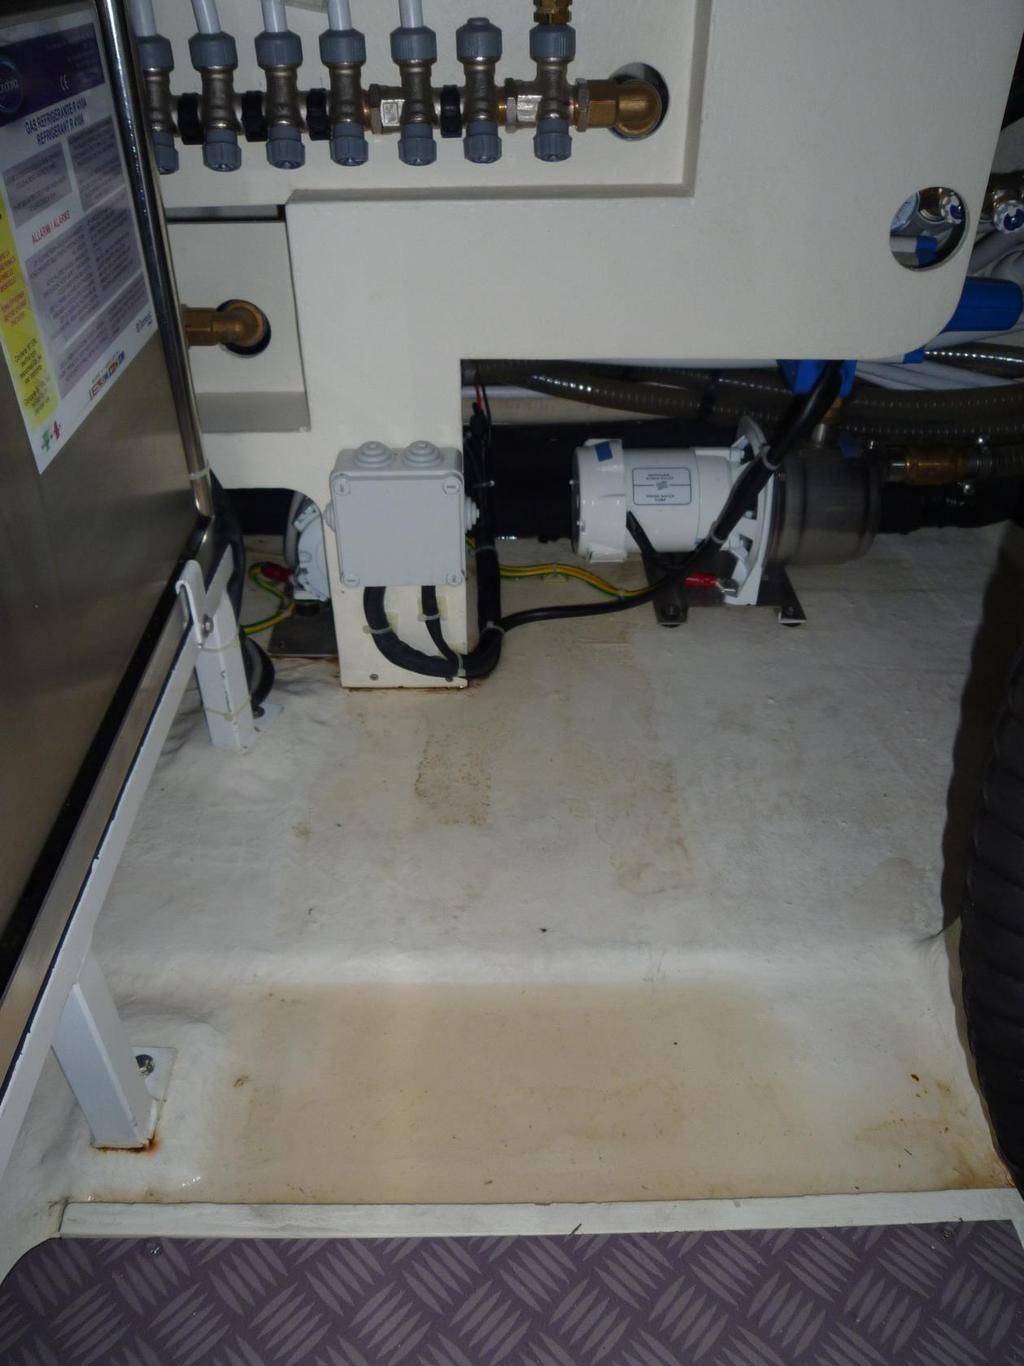 -There was a water leakage from the